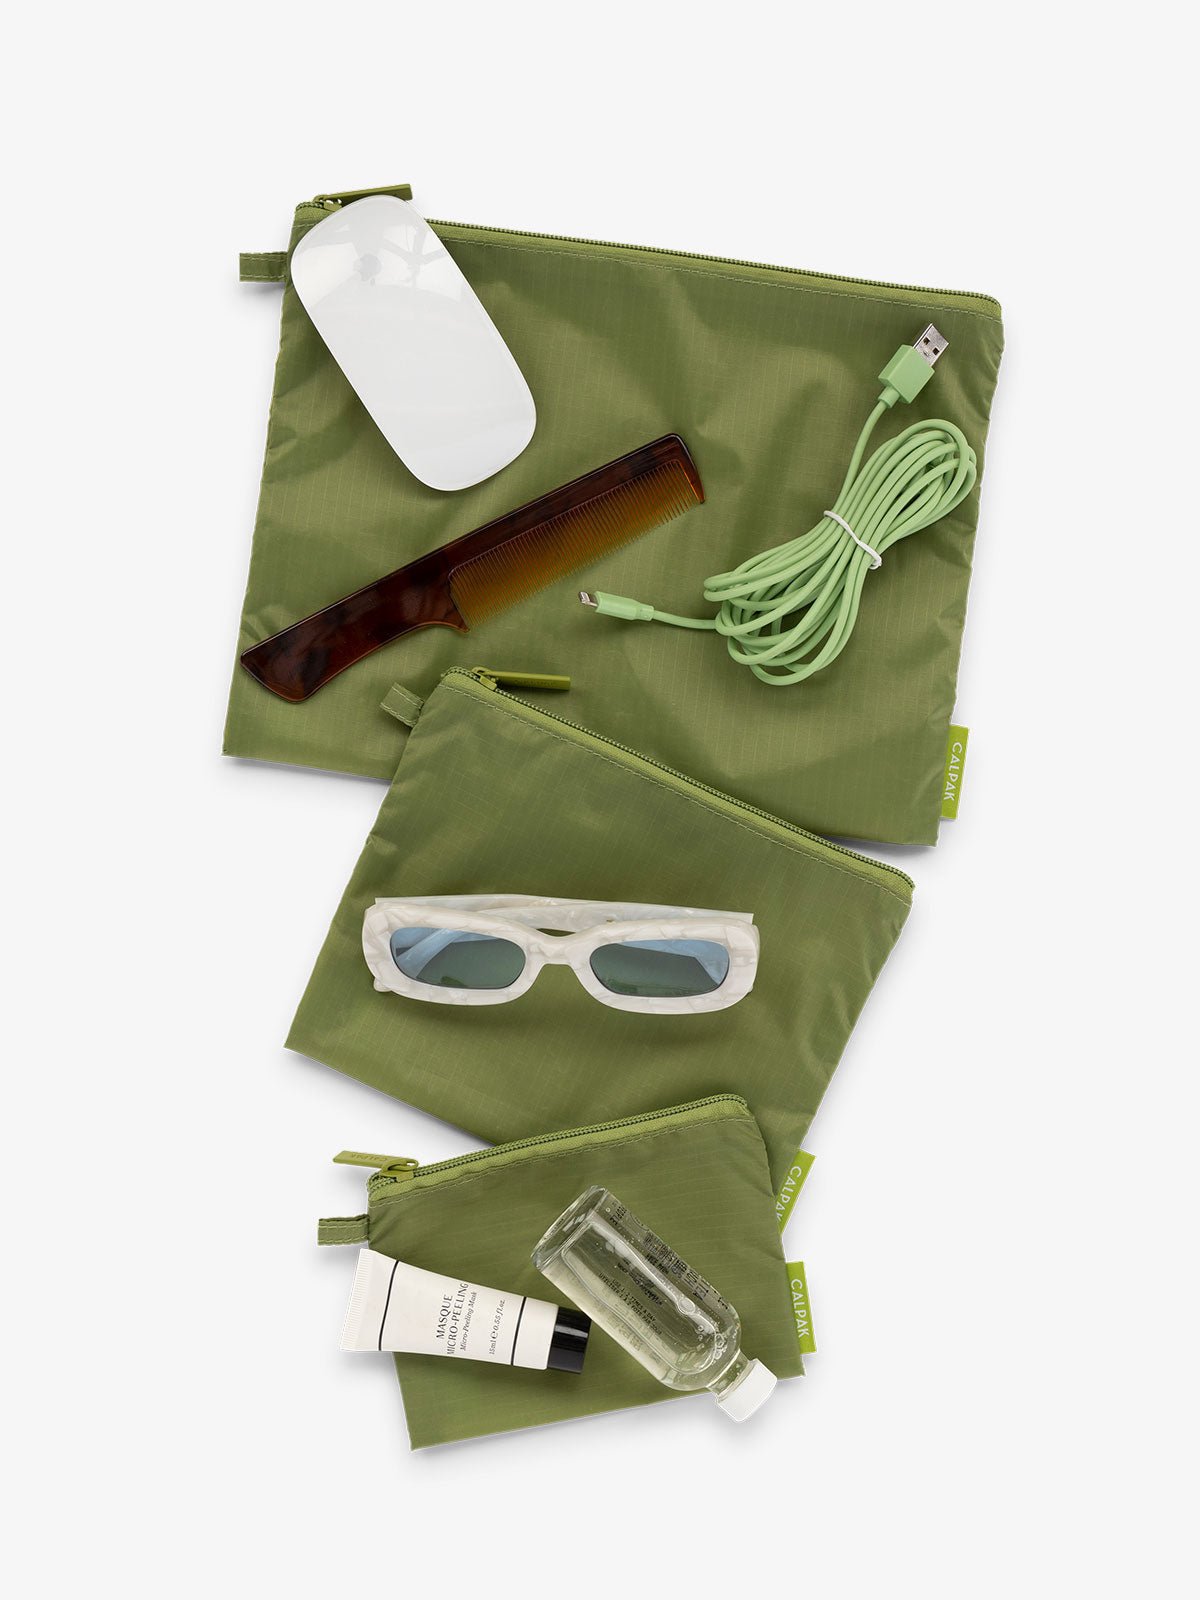 CALPAK Compakt 3 piece zippered pouch set in 3 sizes with water resistant material in palm green